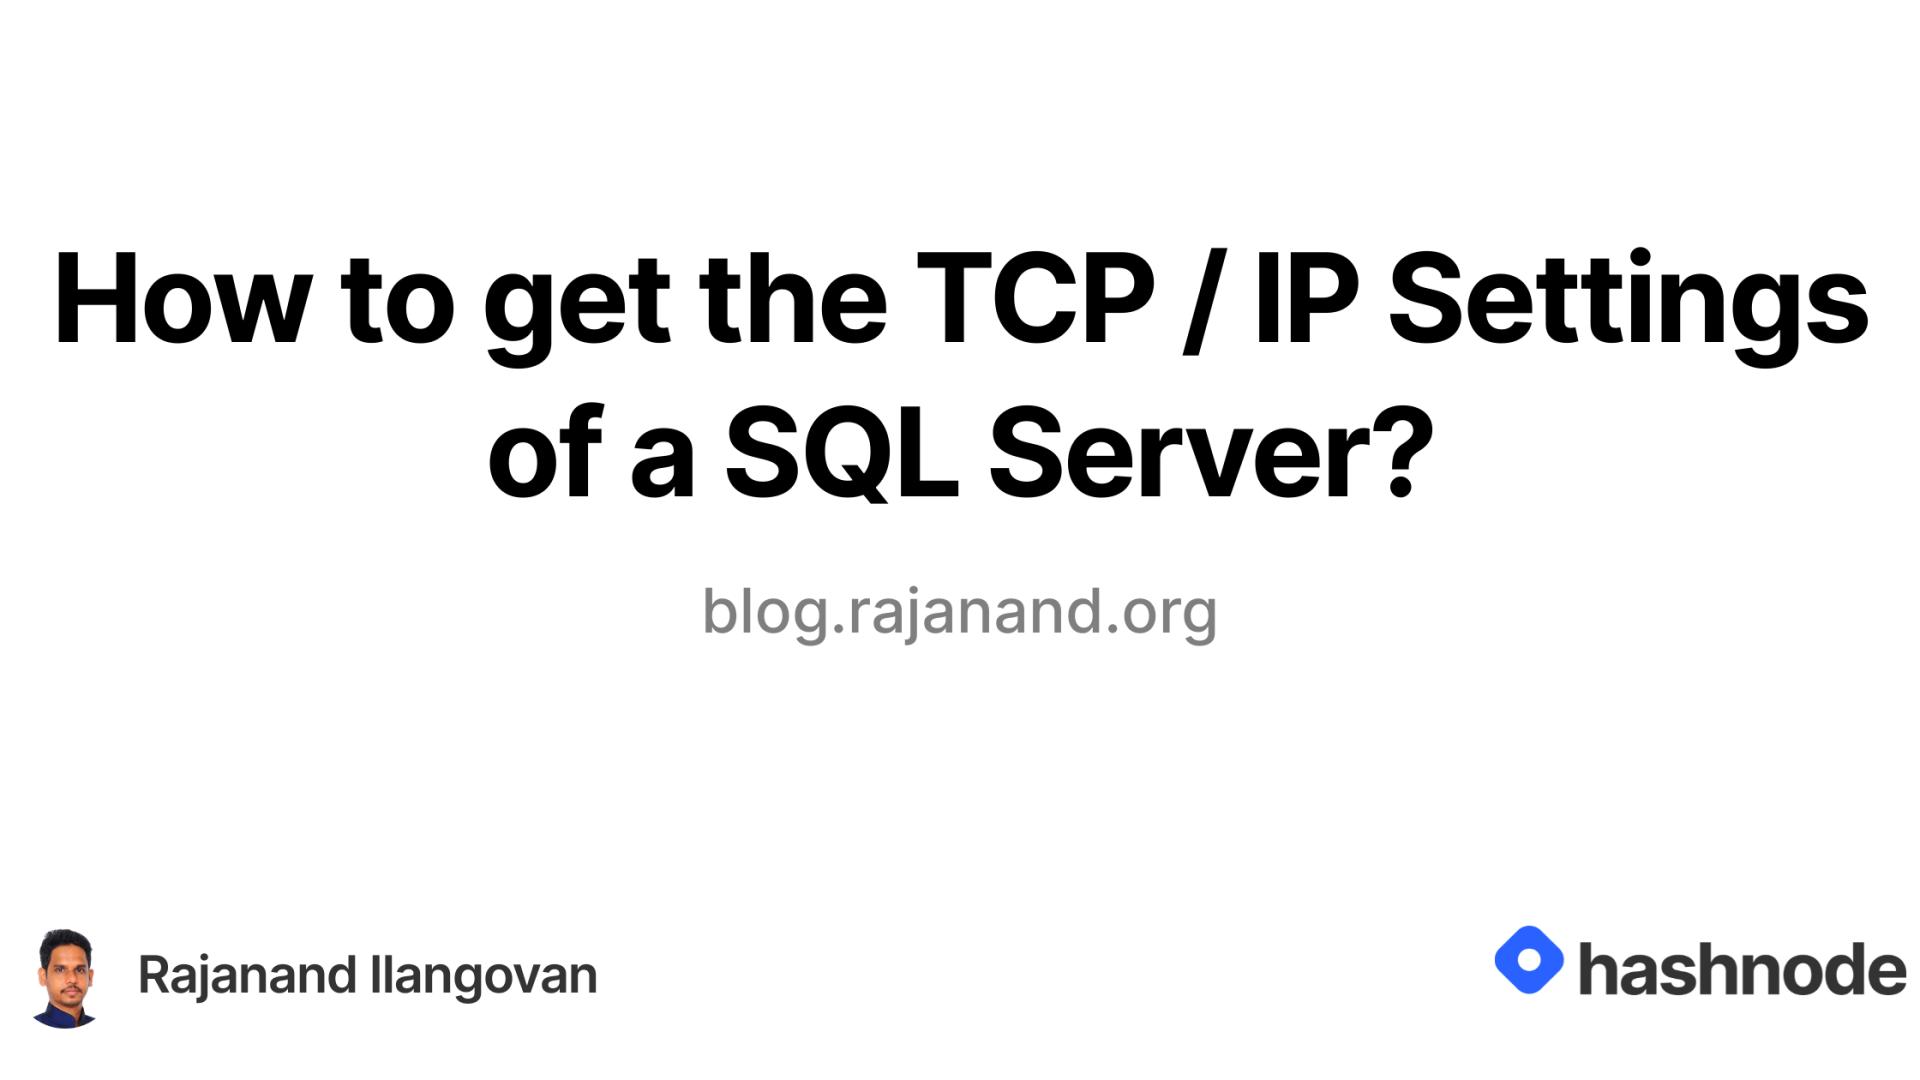 How to get the TCP / IP Settings of a SQL Server?